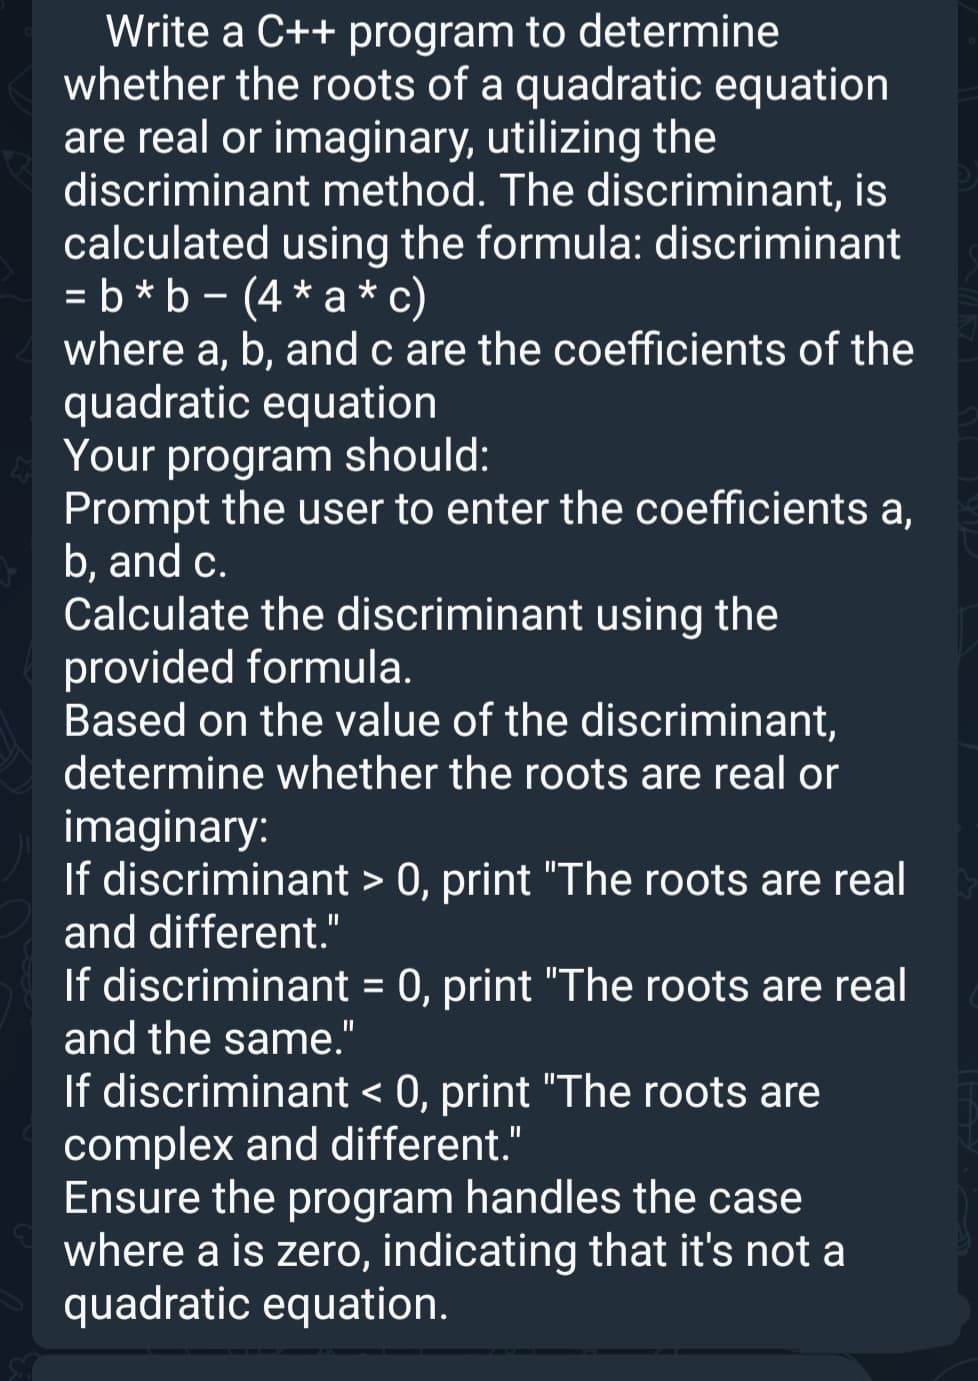 Write a C++ program to determine
whether the roots of a quadratic equation
are real or imaginary, utilizing the
discriminant method. The discriminant, is
calculated using the formula: discriminant
=b*b - (4*a*c)
where a, b, and c are the coefficients of the
quadratic equation
Your program should:
Prompt the user to enter the coefficients a,
b, and c.
Calculate the discriminant using the
provided formula.
Based on the value of the discriminant,
determine whether the roots are real or
imaginary:
If discriminant > 0, print "The roots are real
and different."
If discriminant = 0, print "The roots are real
and the same."
If discriminant < 0, print "The roots are
complex and different."
Ensure the program handles the case
where a is zero, indicating that it's not a
quadratic equation.